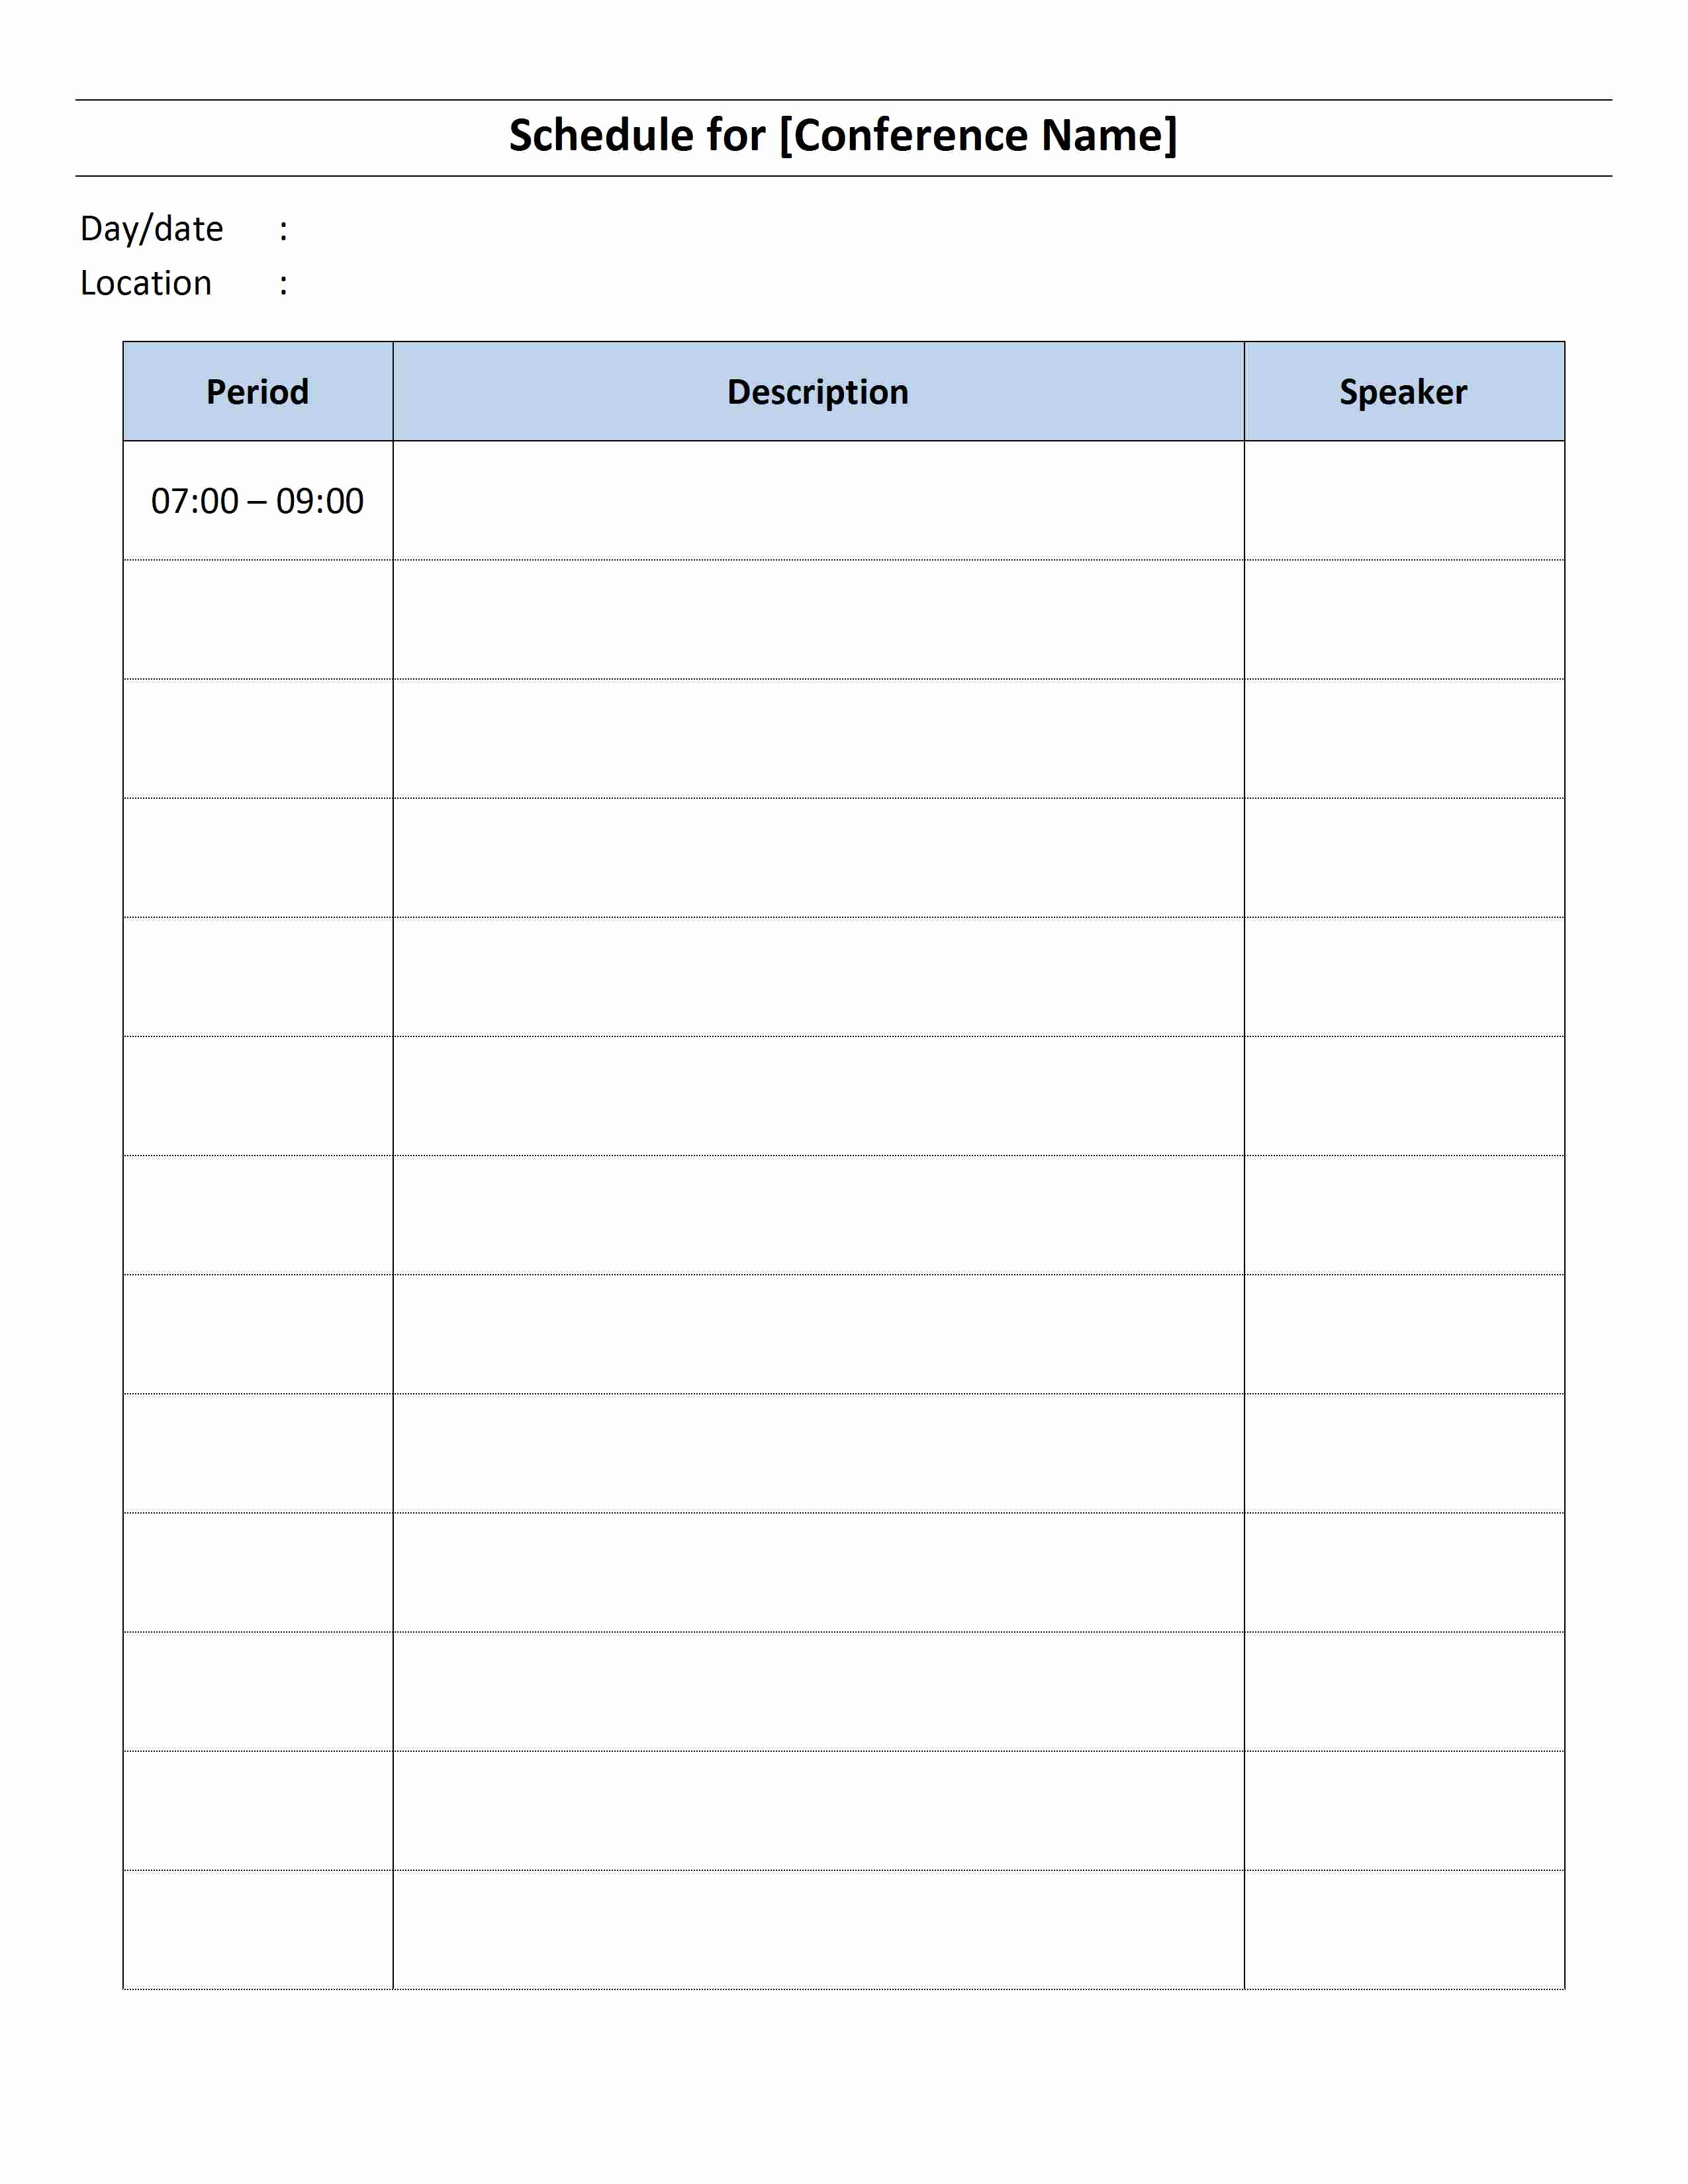 Daily Schedule Template Word Inspirational Conference Schedule